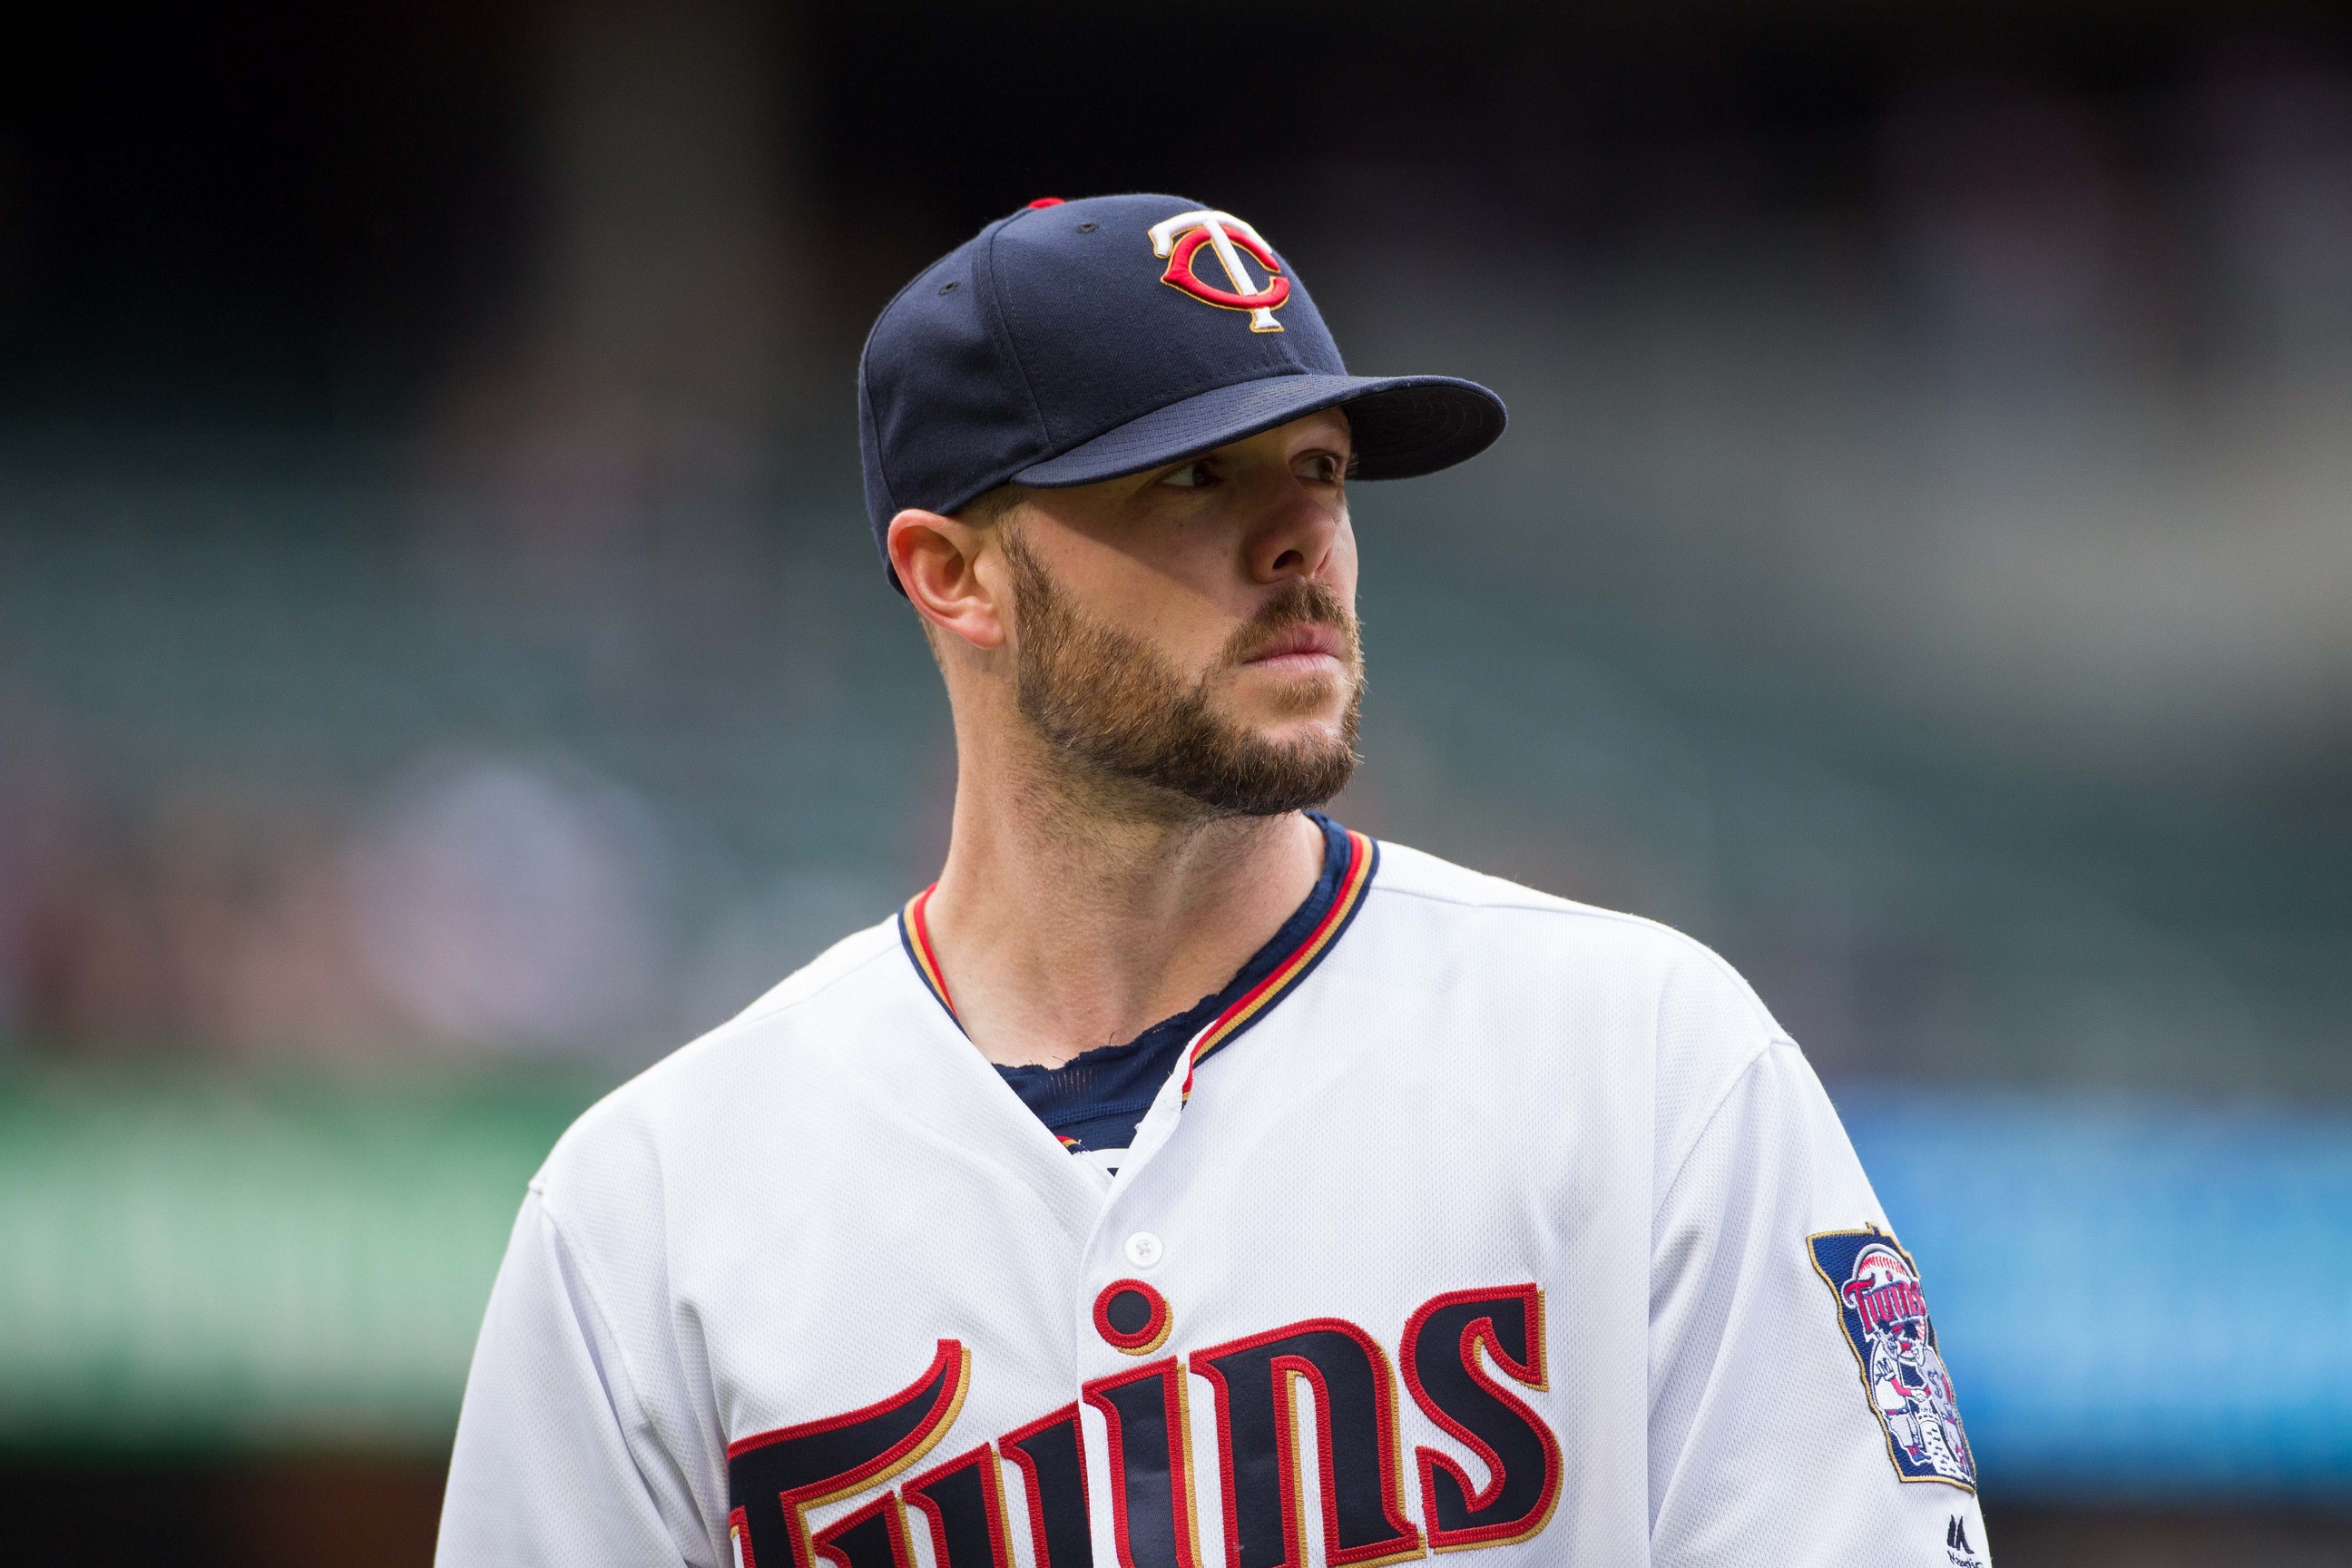 He's always had the stuff': Ryan Pressly's path to becoming a